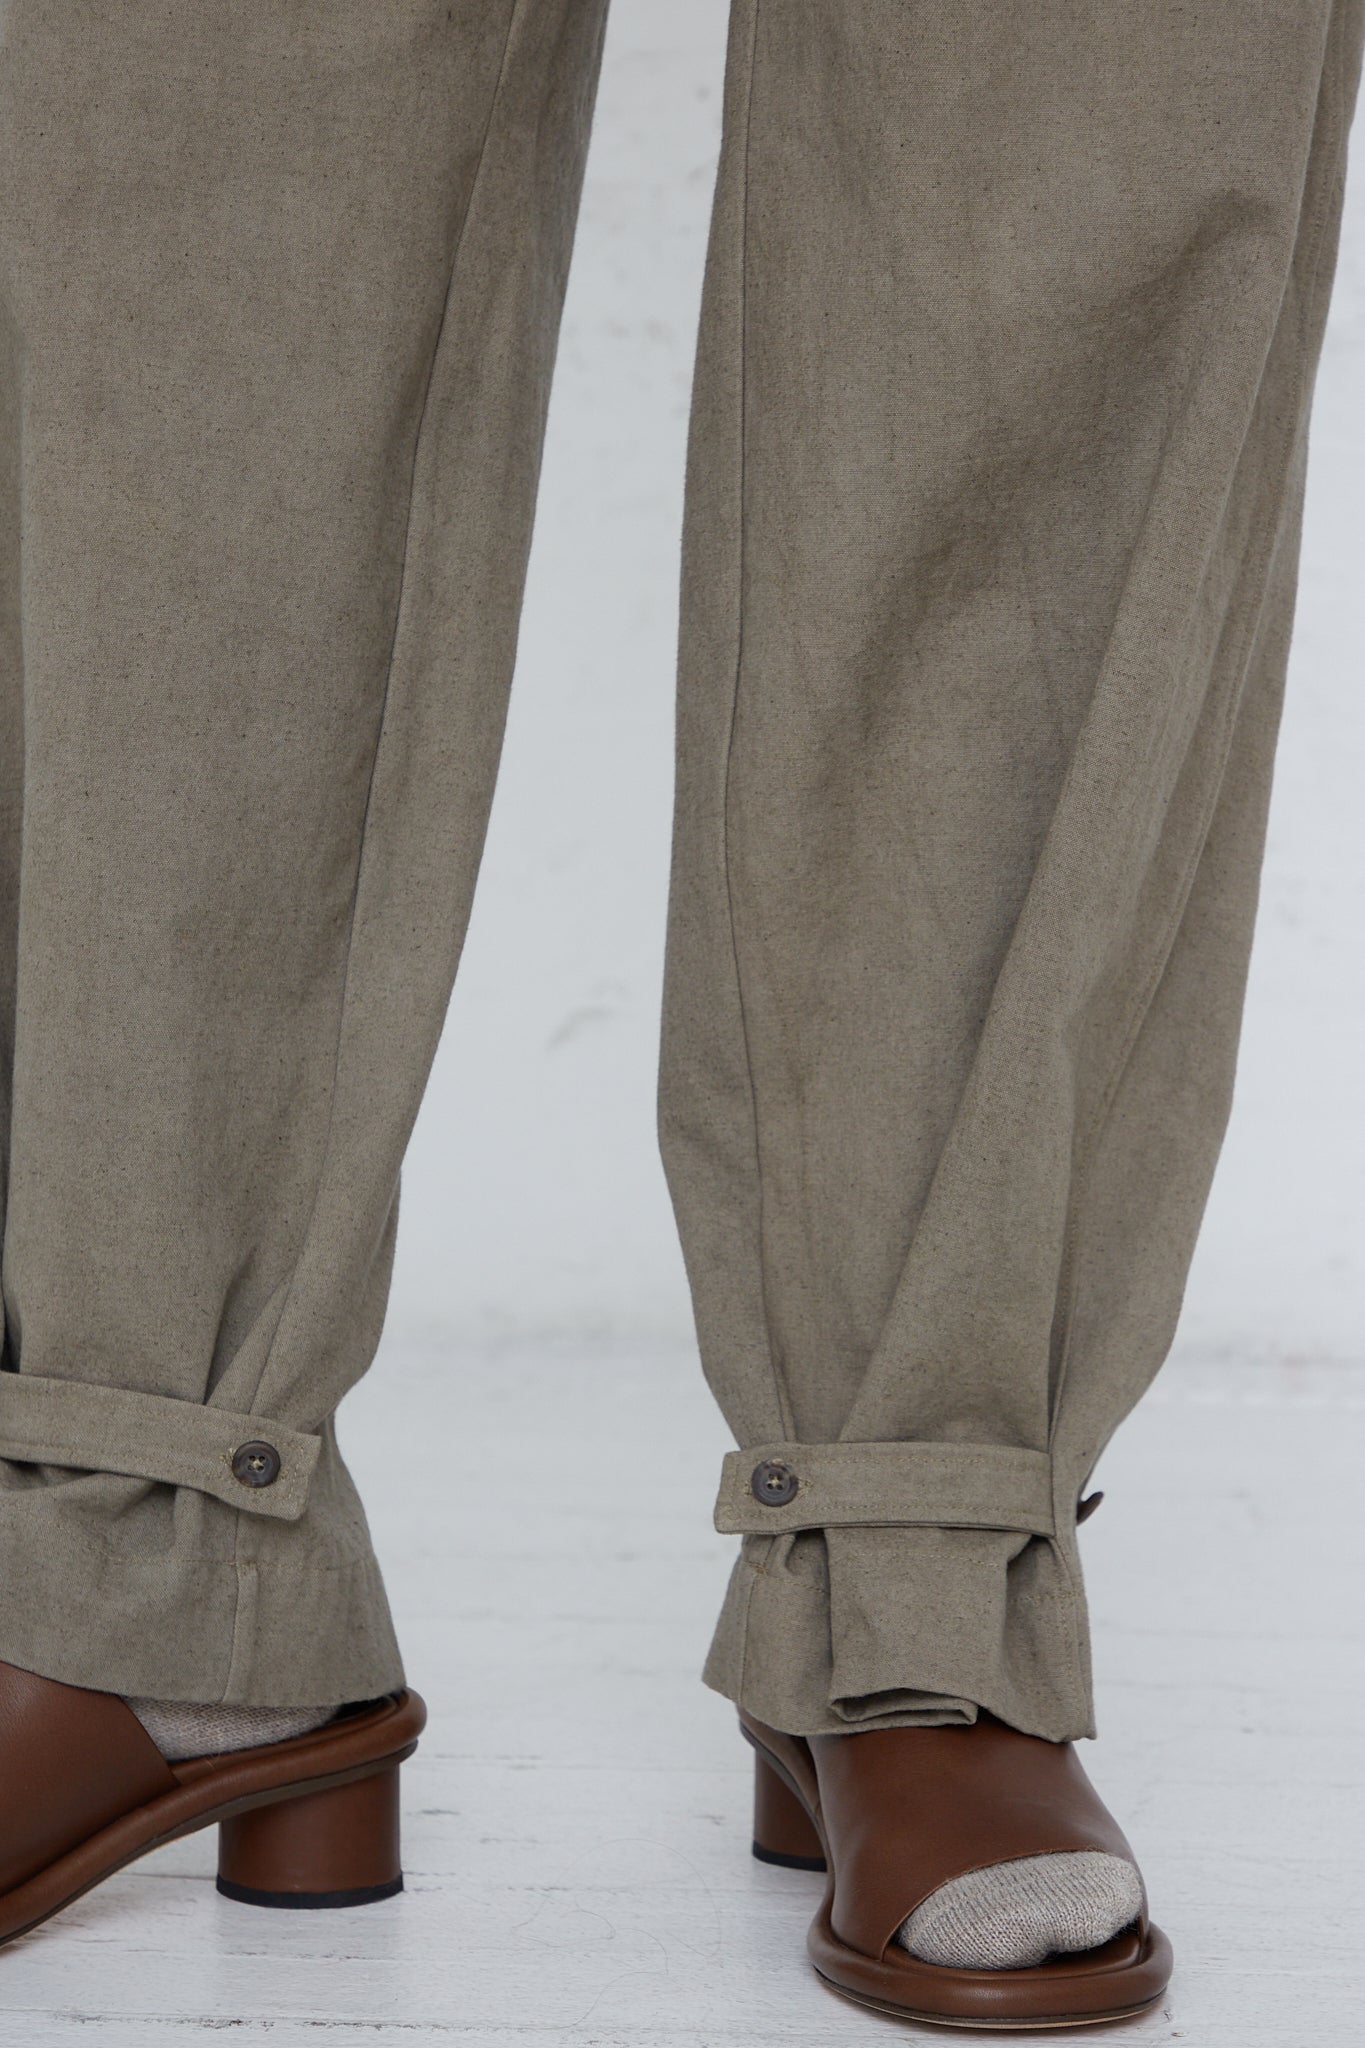 The legs of a woman wearing Lauren Manoogian Belted Trouser in Fatigue pants and brown sandals.